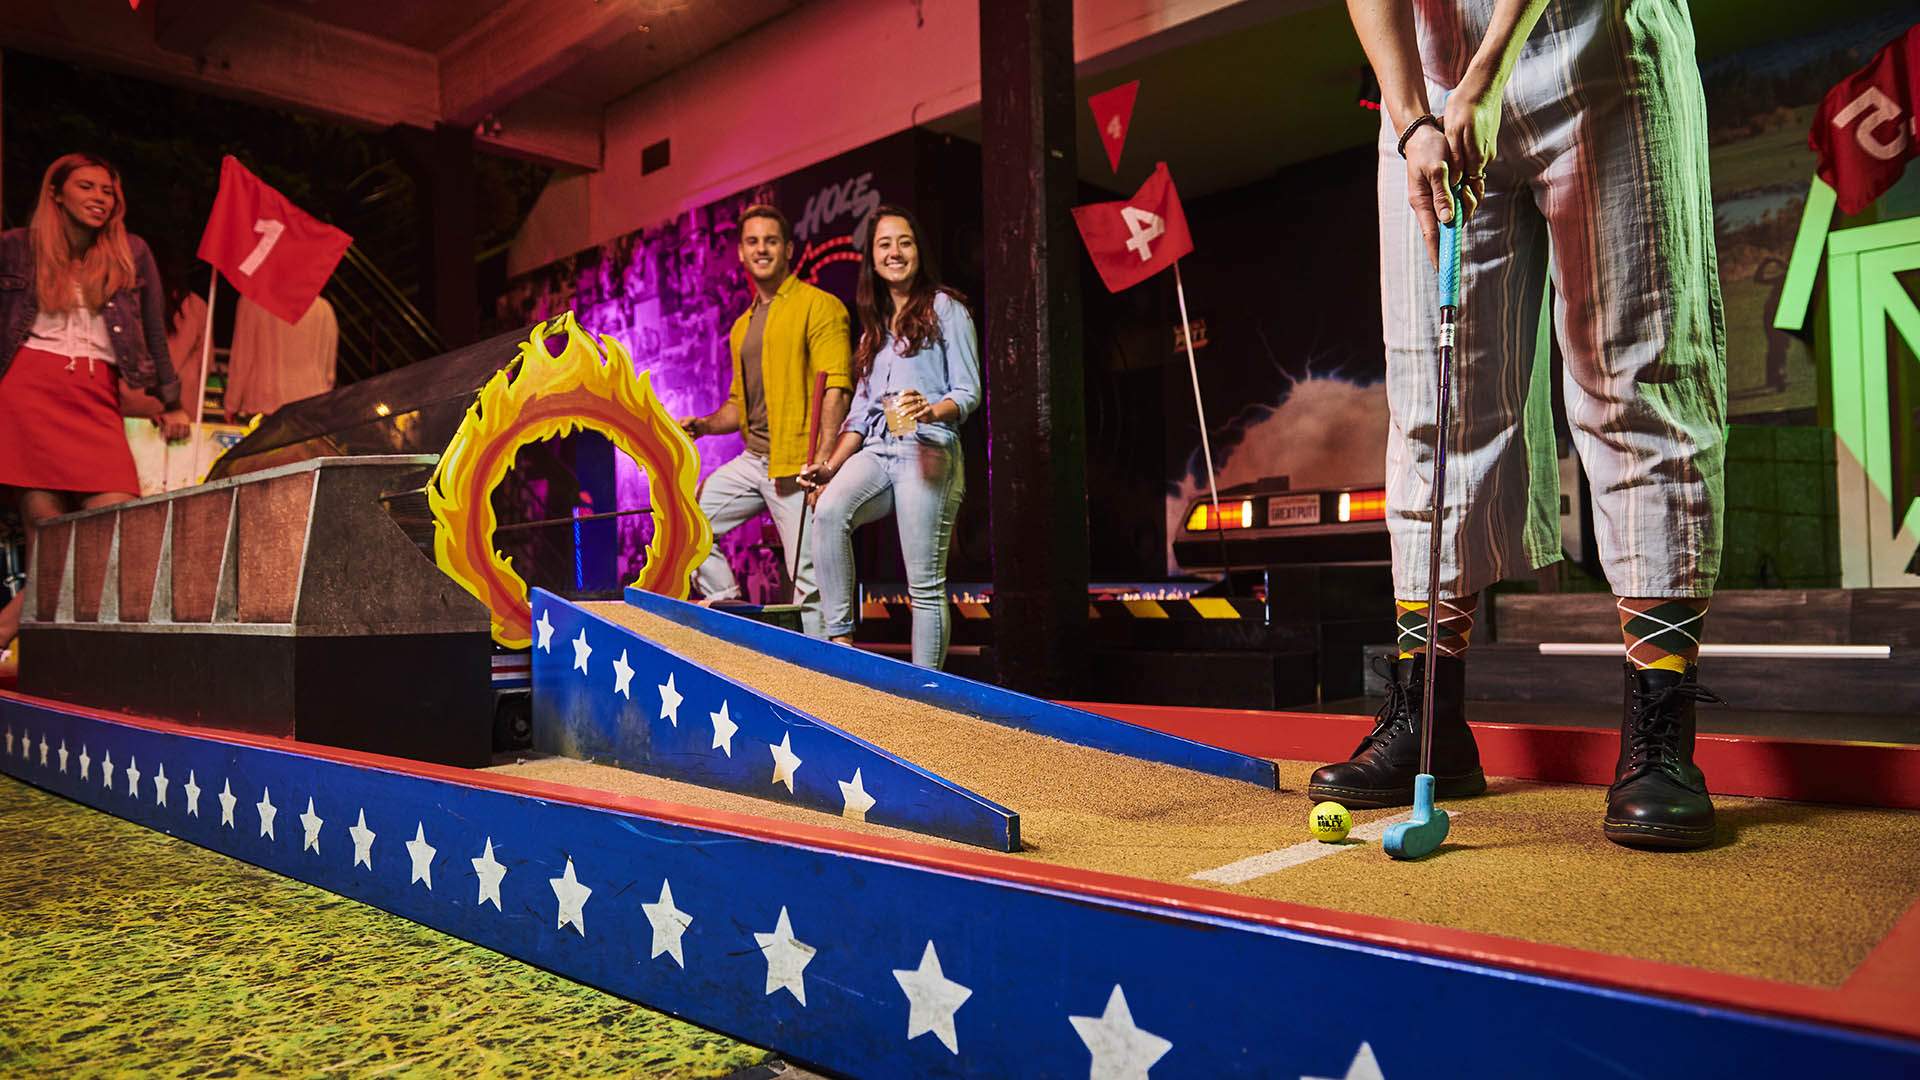 Holey Moley Is Bringing Its OTT Mini-Golf Hijinks (and Drinks) to a New 350-Person Chermside Bar